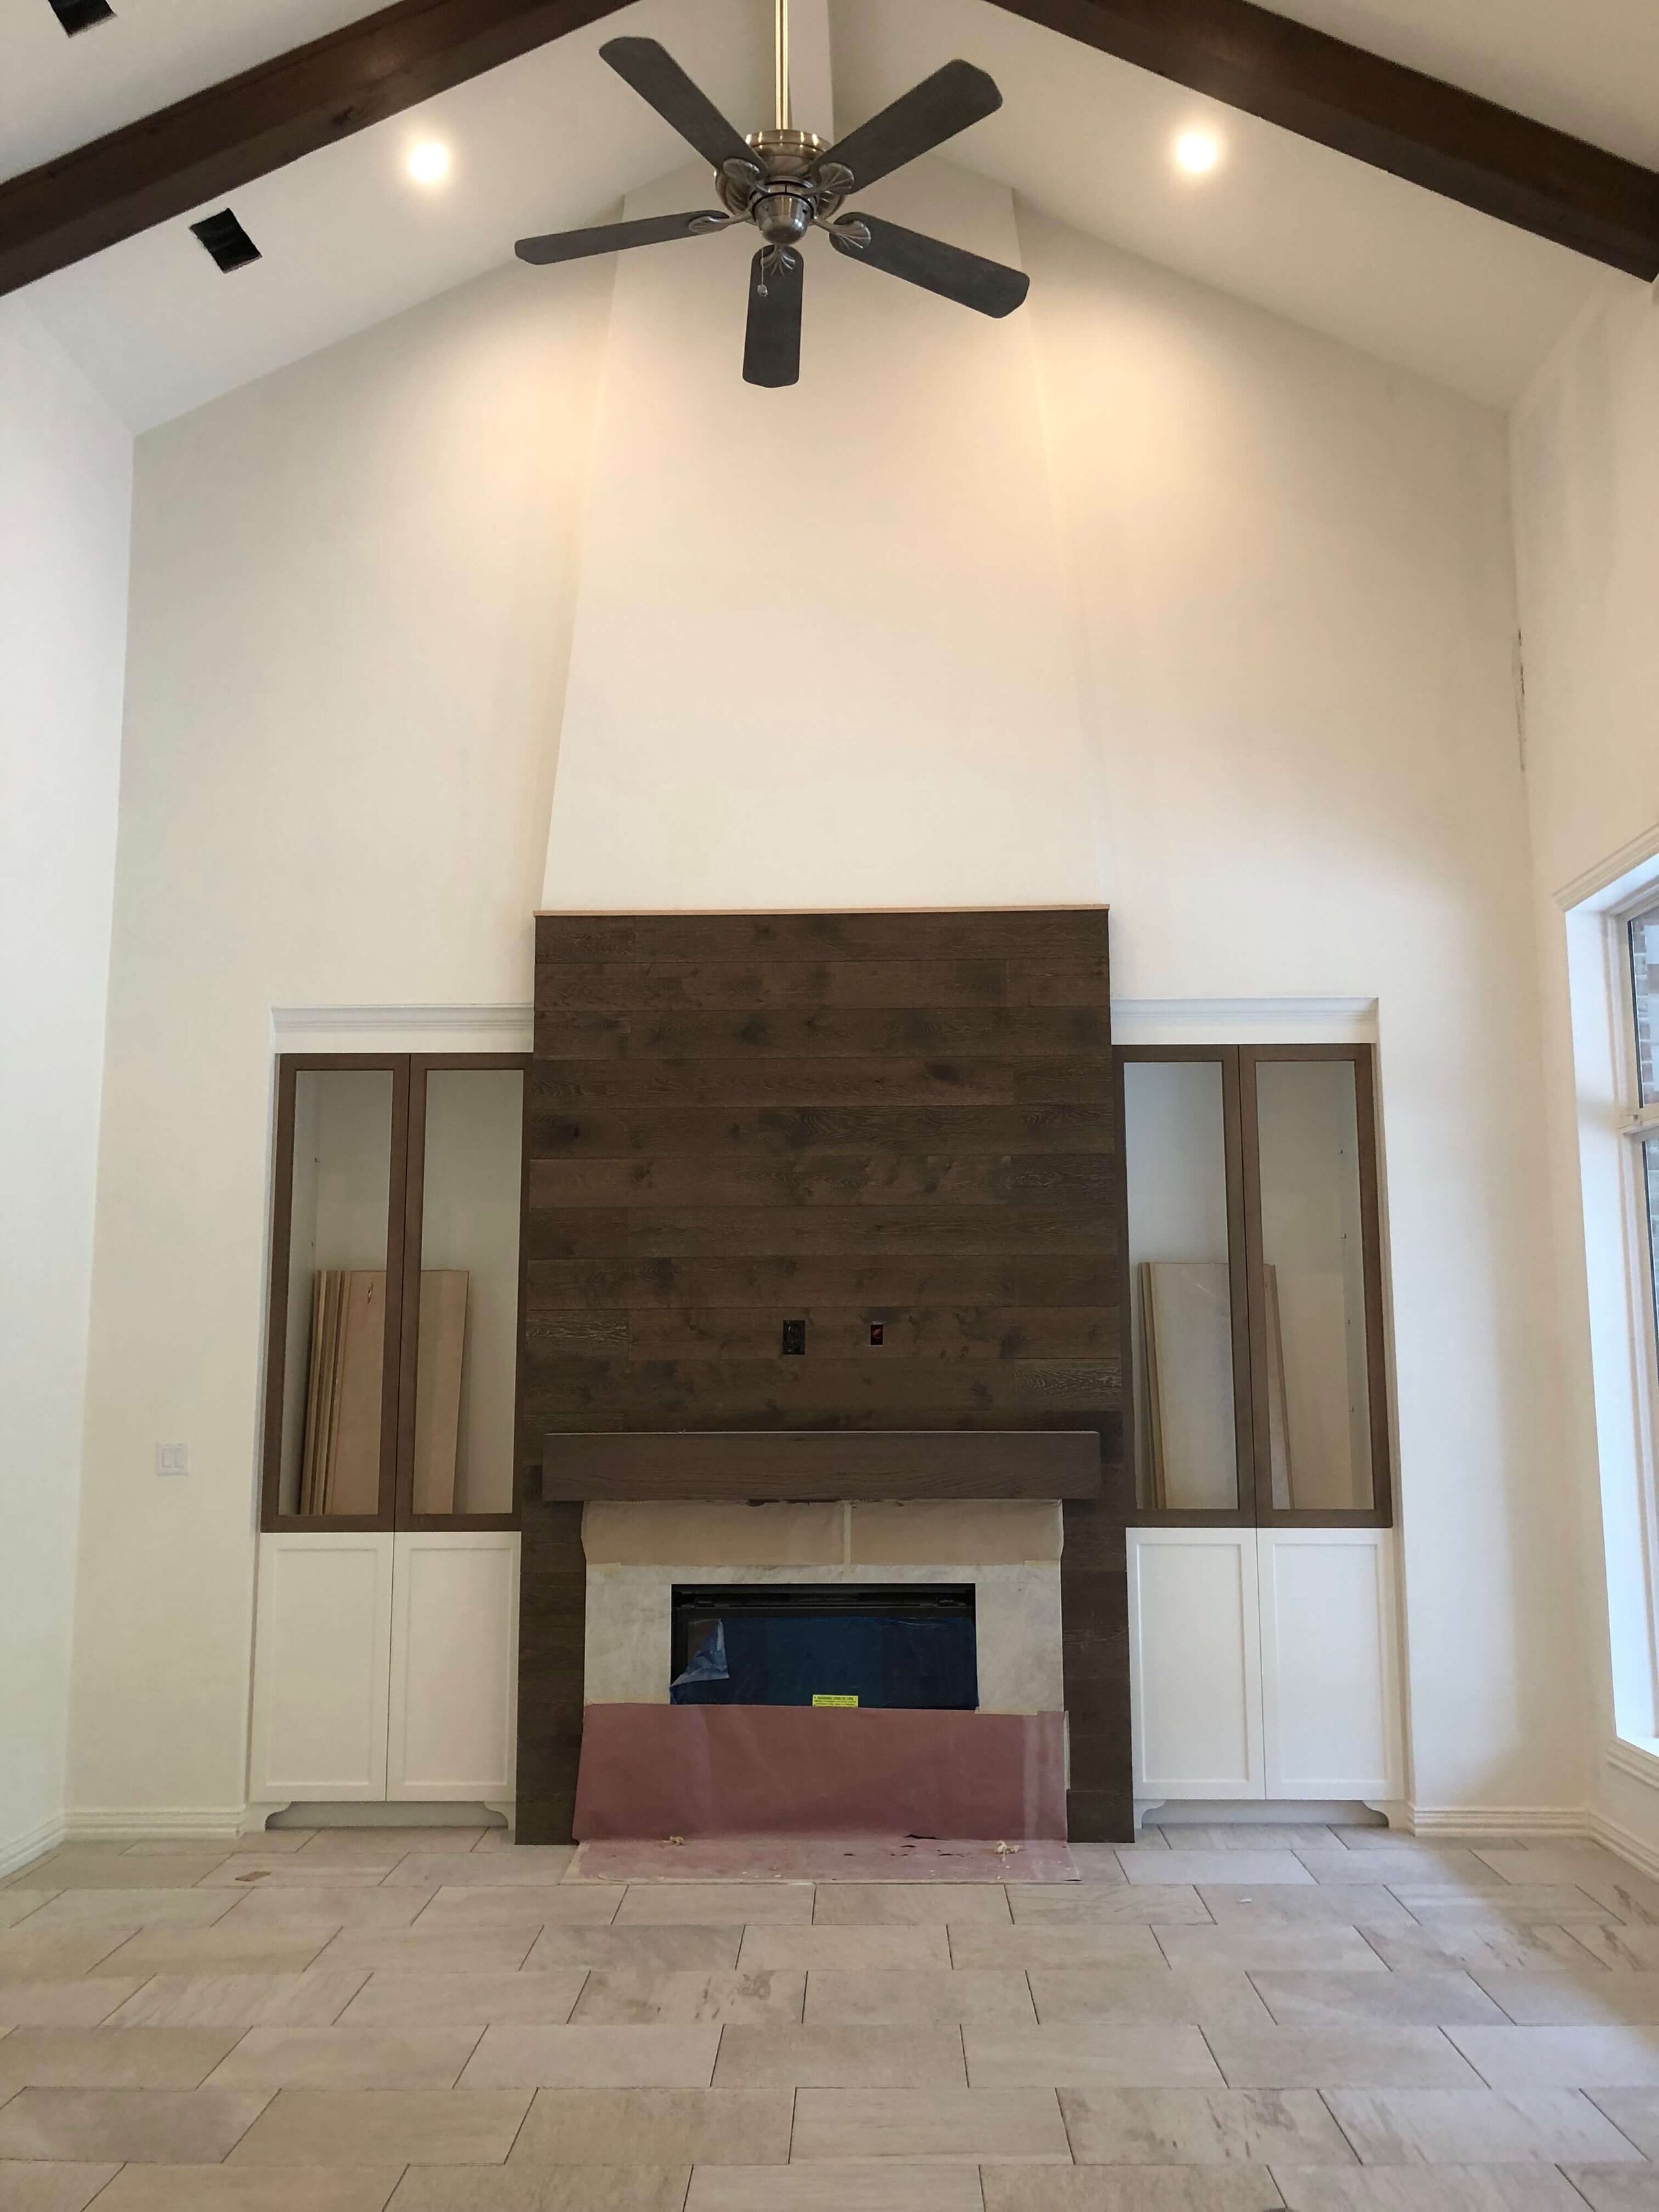 https://images.squarespace-cdn.com/content/v1/4fcf5c8684aef9ce6e0a44b0/1617813295486-1XIH48UNXRHNC1E5LD3A/Almost+finished+fireplace+wall.jpg